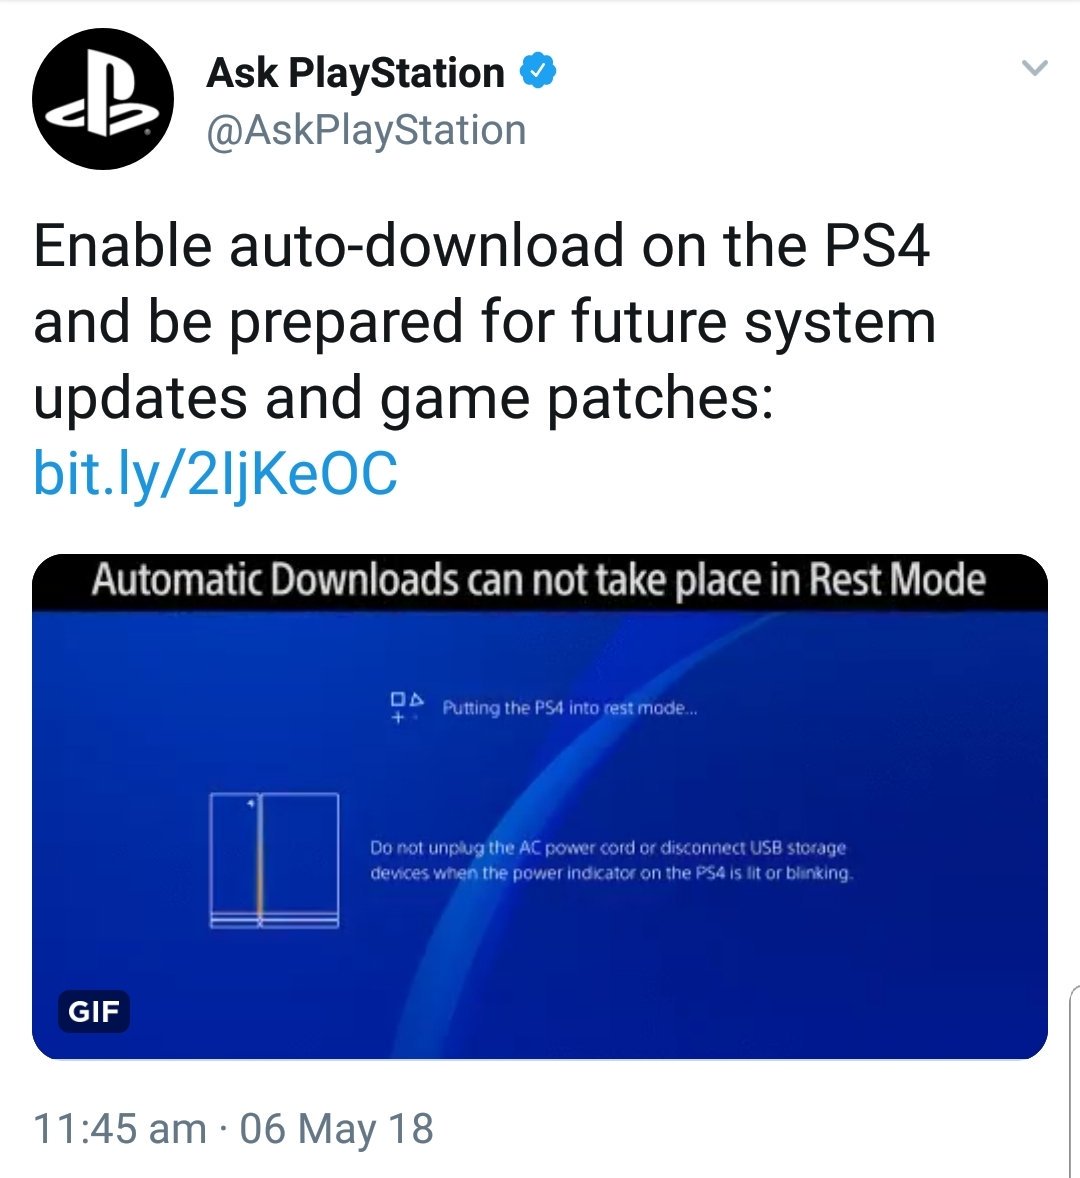 Arkæologi Vandret halstørklæde توییتر \ Ask PlayStation در توییتر: «Enable auto-download on the PS4 and be  prepared for future system updates and game patches:  https://t.co/yQHiuSDVNS https://t.co/QLE2ZWrbYE»